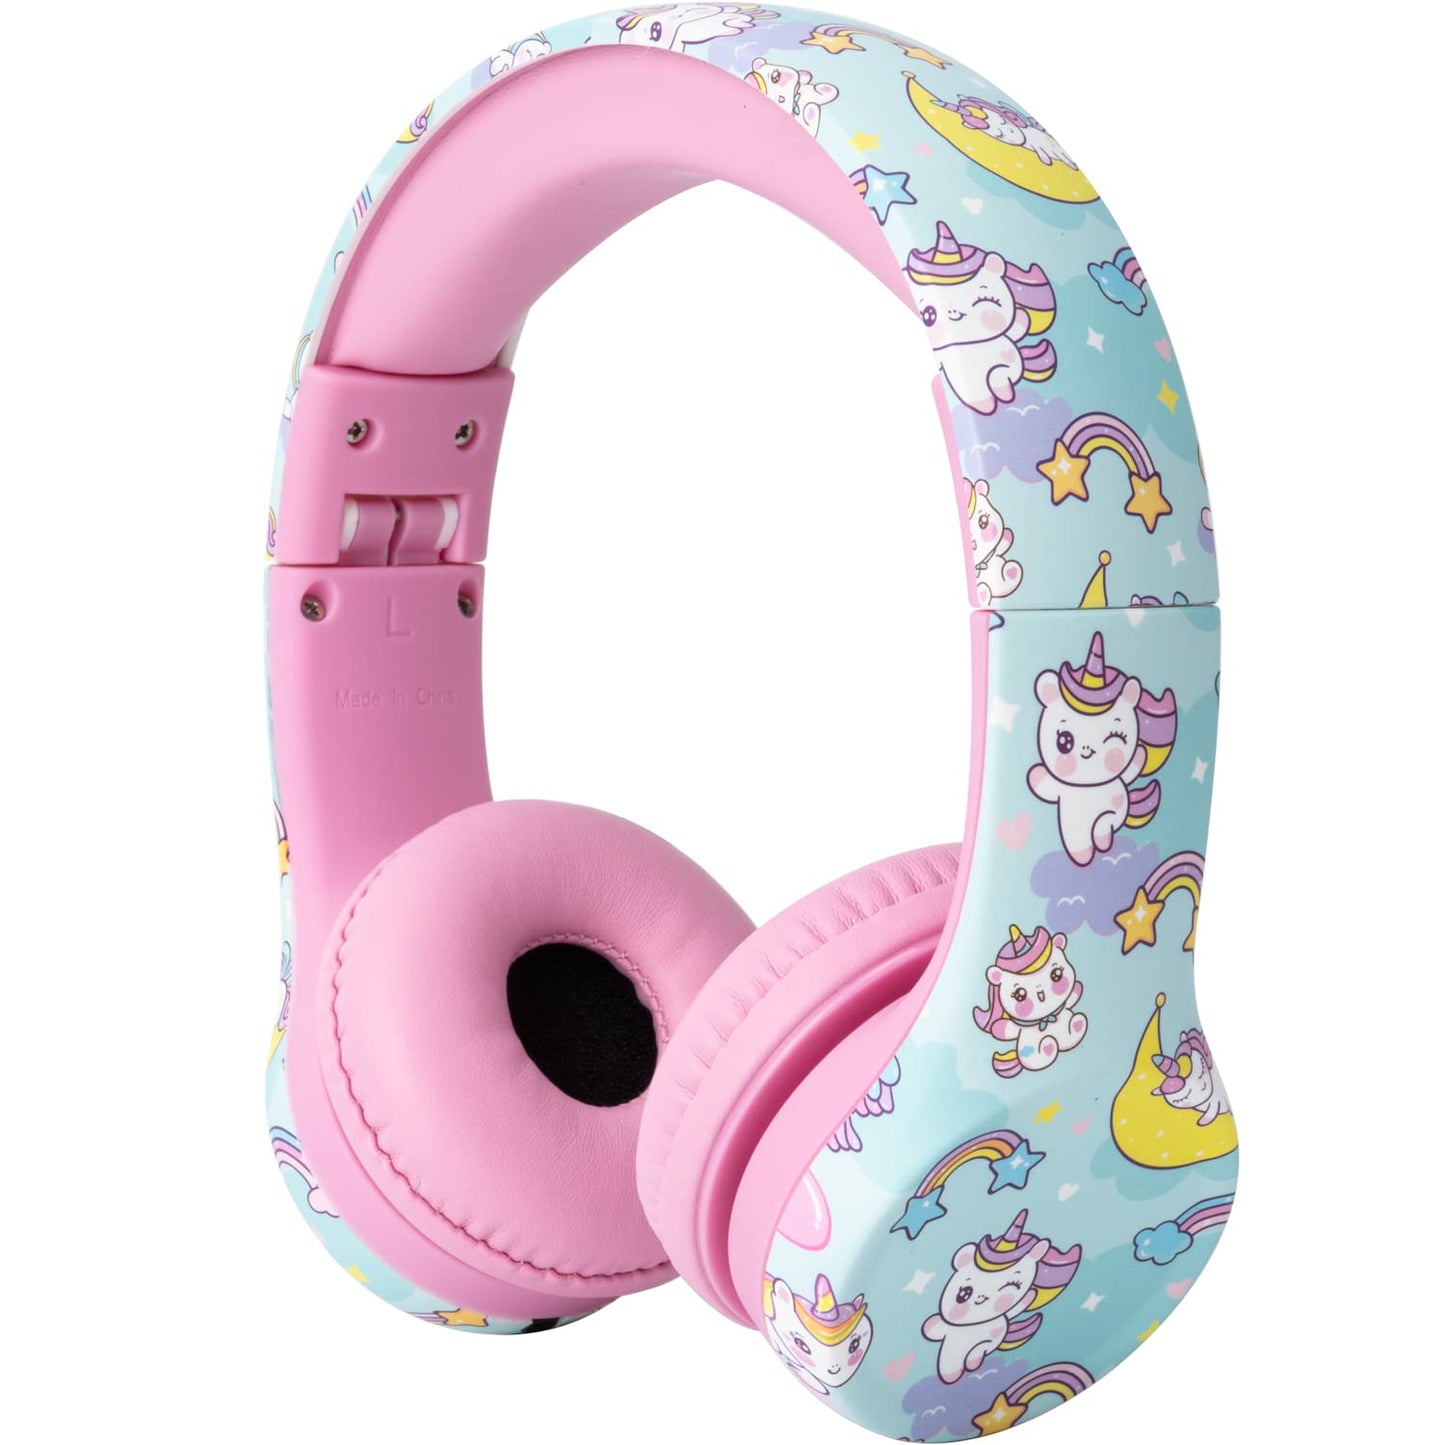 Snug Play+ Kids Headphones with Volume Limiting for Toddlers (Boys/Girls) - Aqua